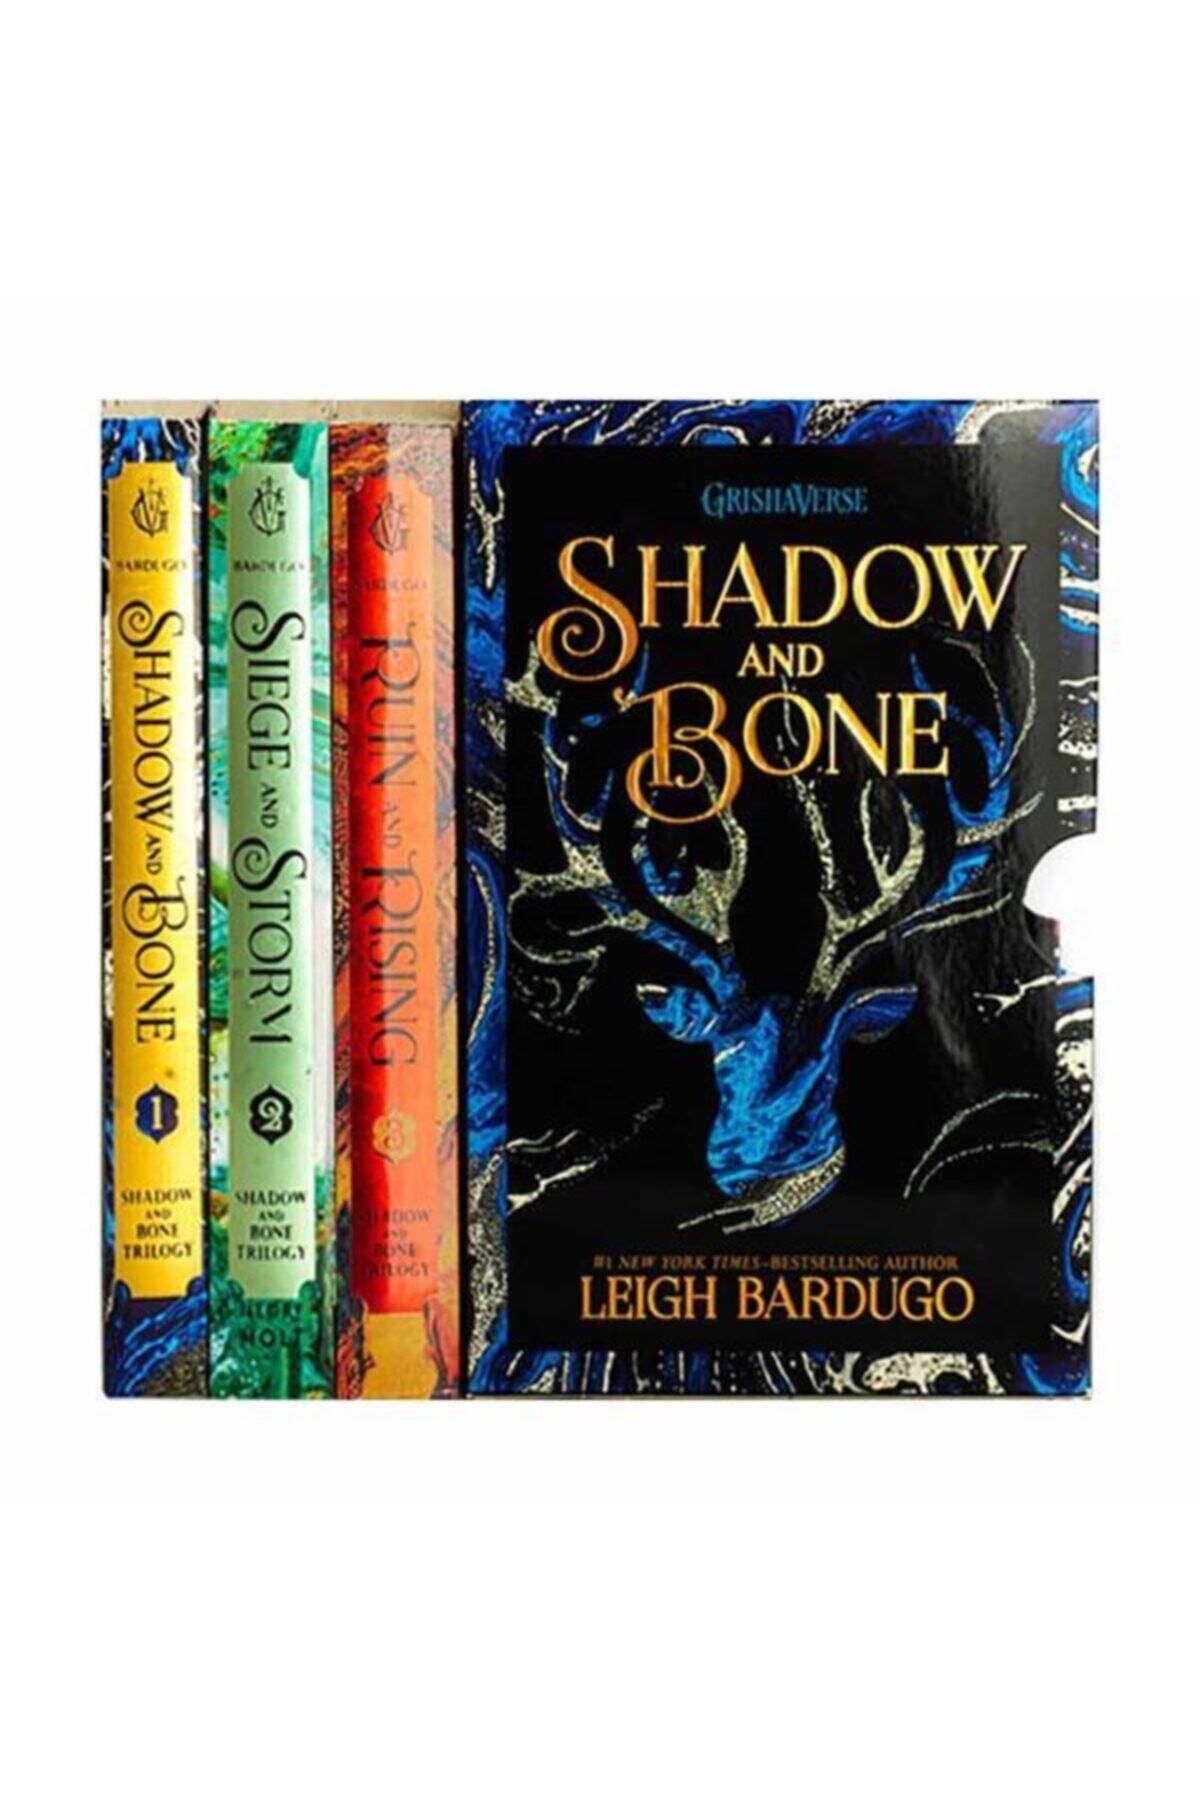 Square Fish The Shadow And Bone Trilogy Boxed Set